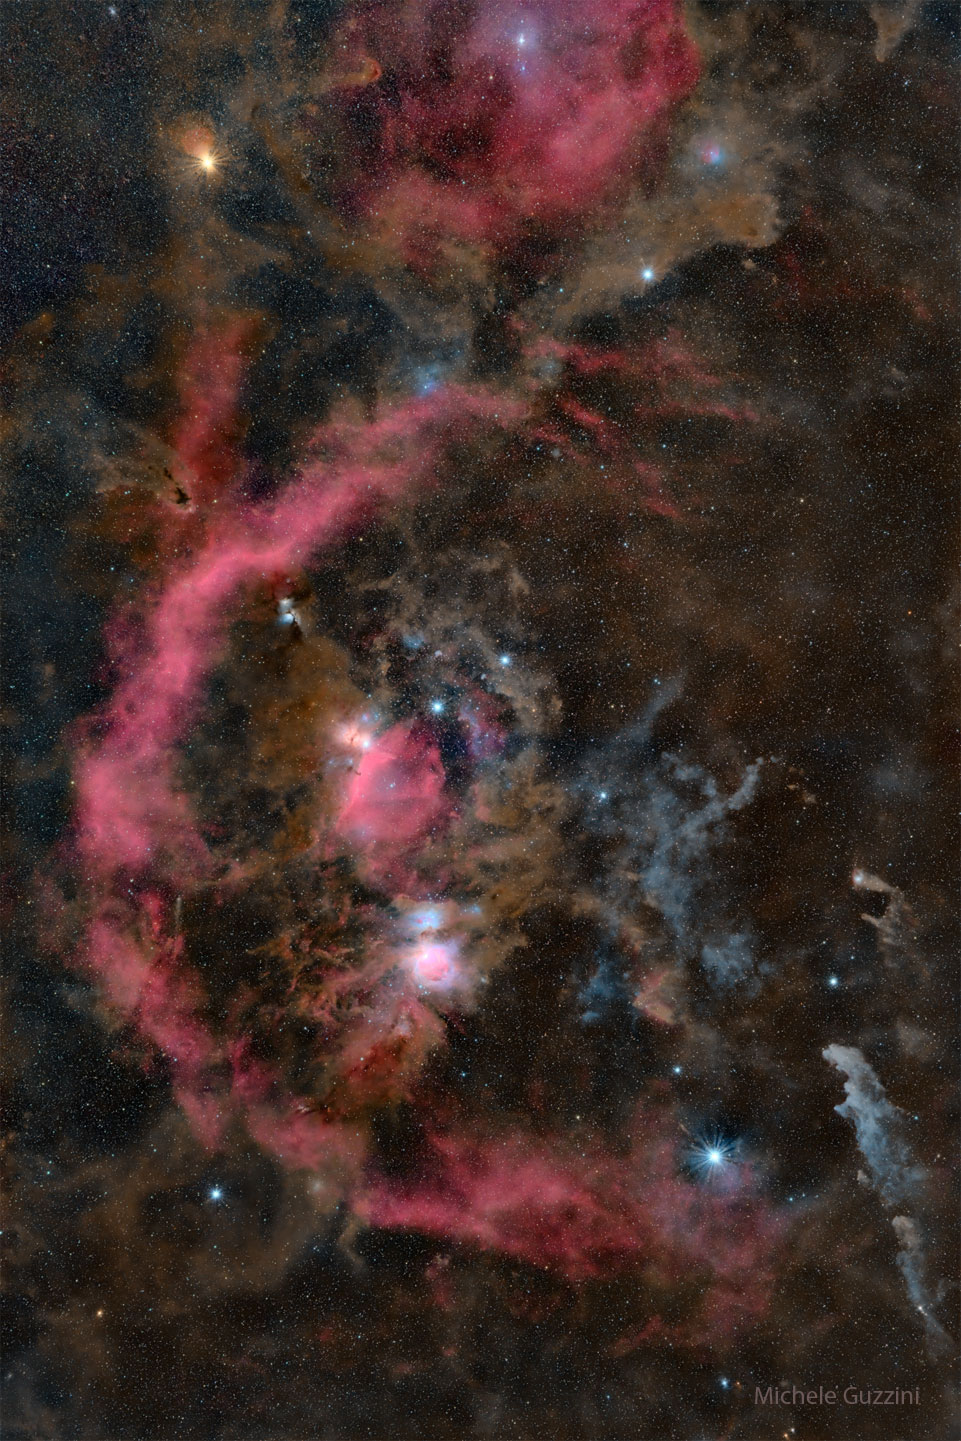 The constellation of Orion is shown, but the image is so deep
that many nebula appear, making the belt stars and surrounding 
star almost recognizable. The rollover image labels the brightest
stars. 
Please see the explanation for more detailed information.